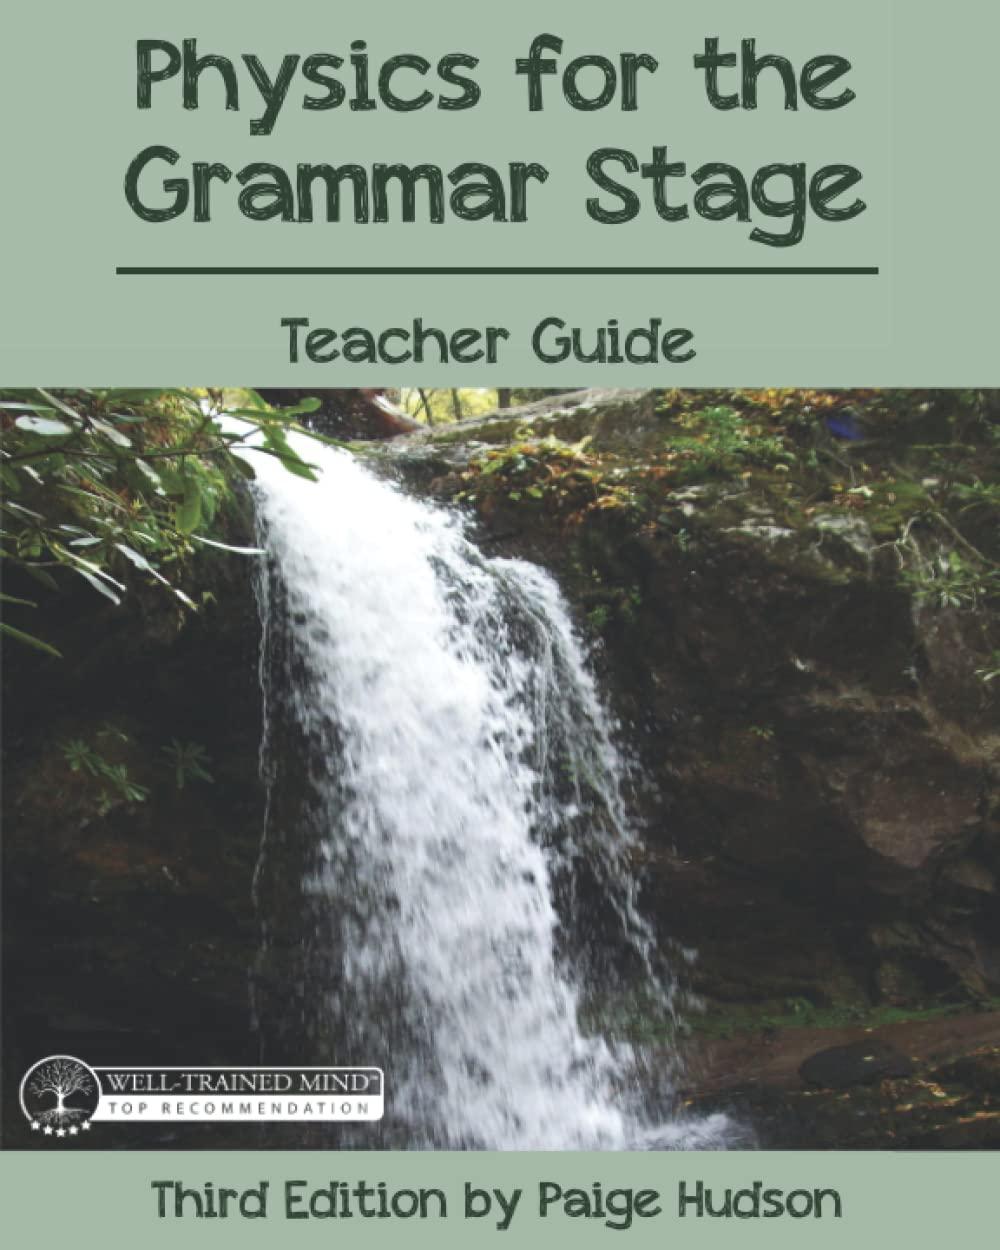 physics for the grammar stage teacher guide 3rd edition paige hudson 1953490123, 978-1953490124